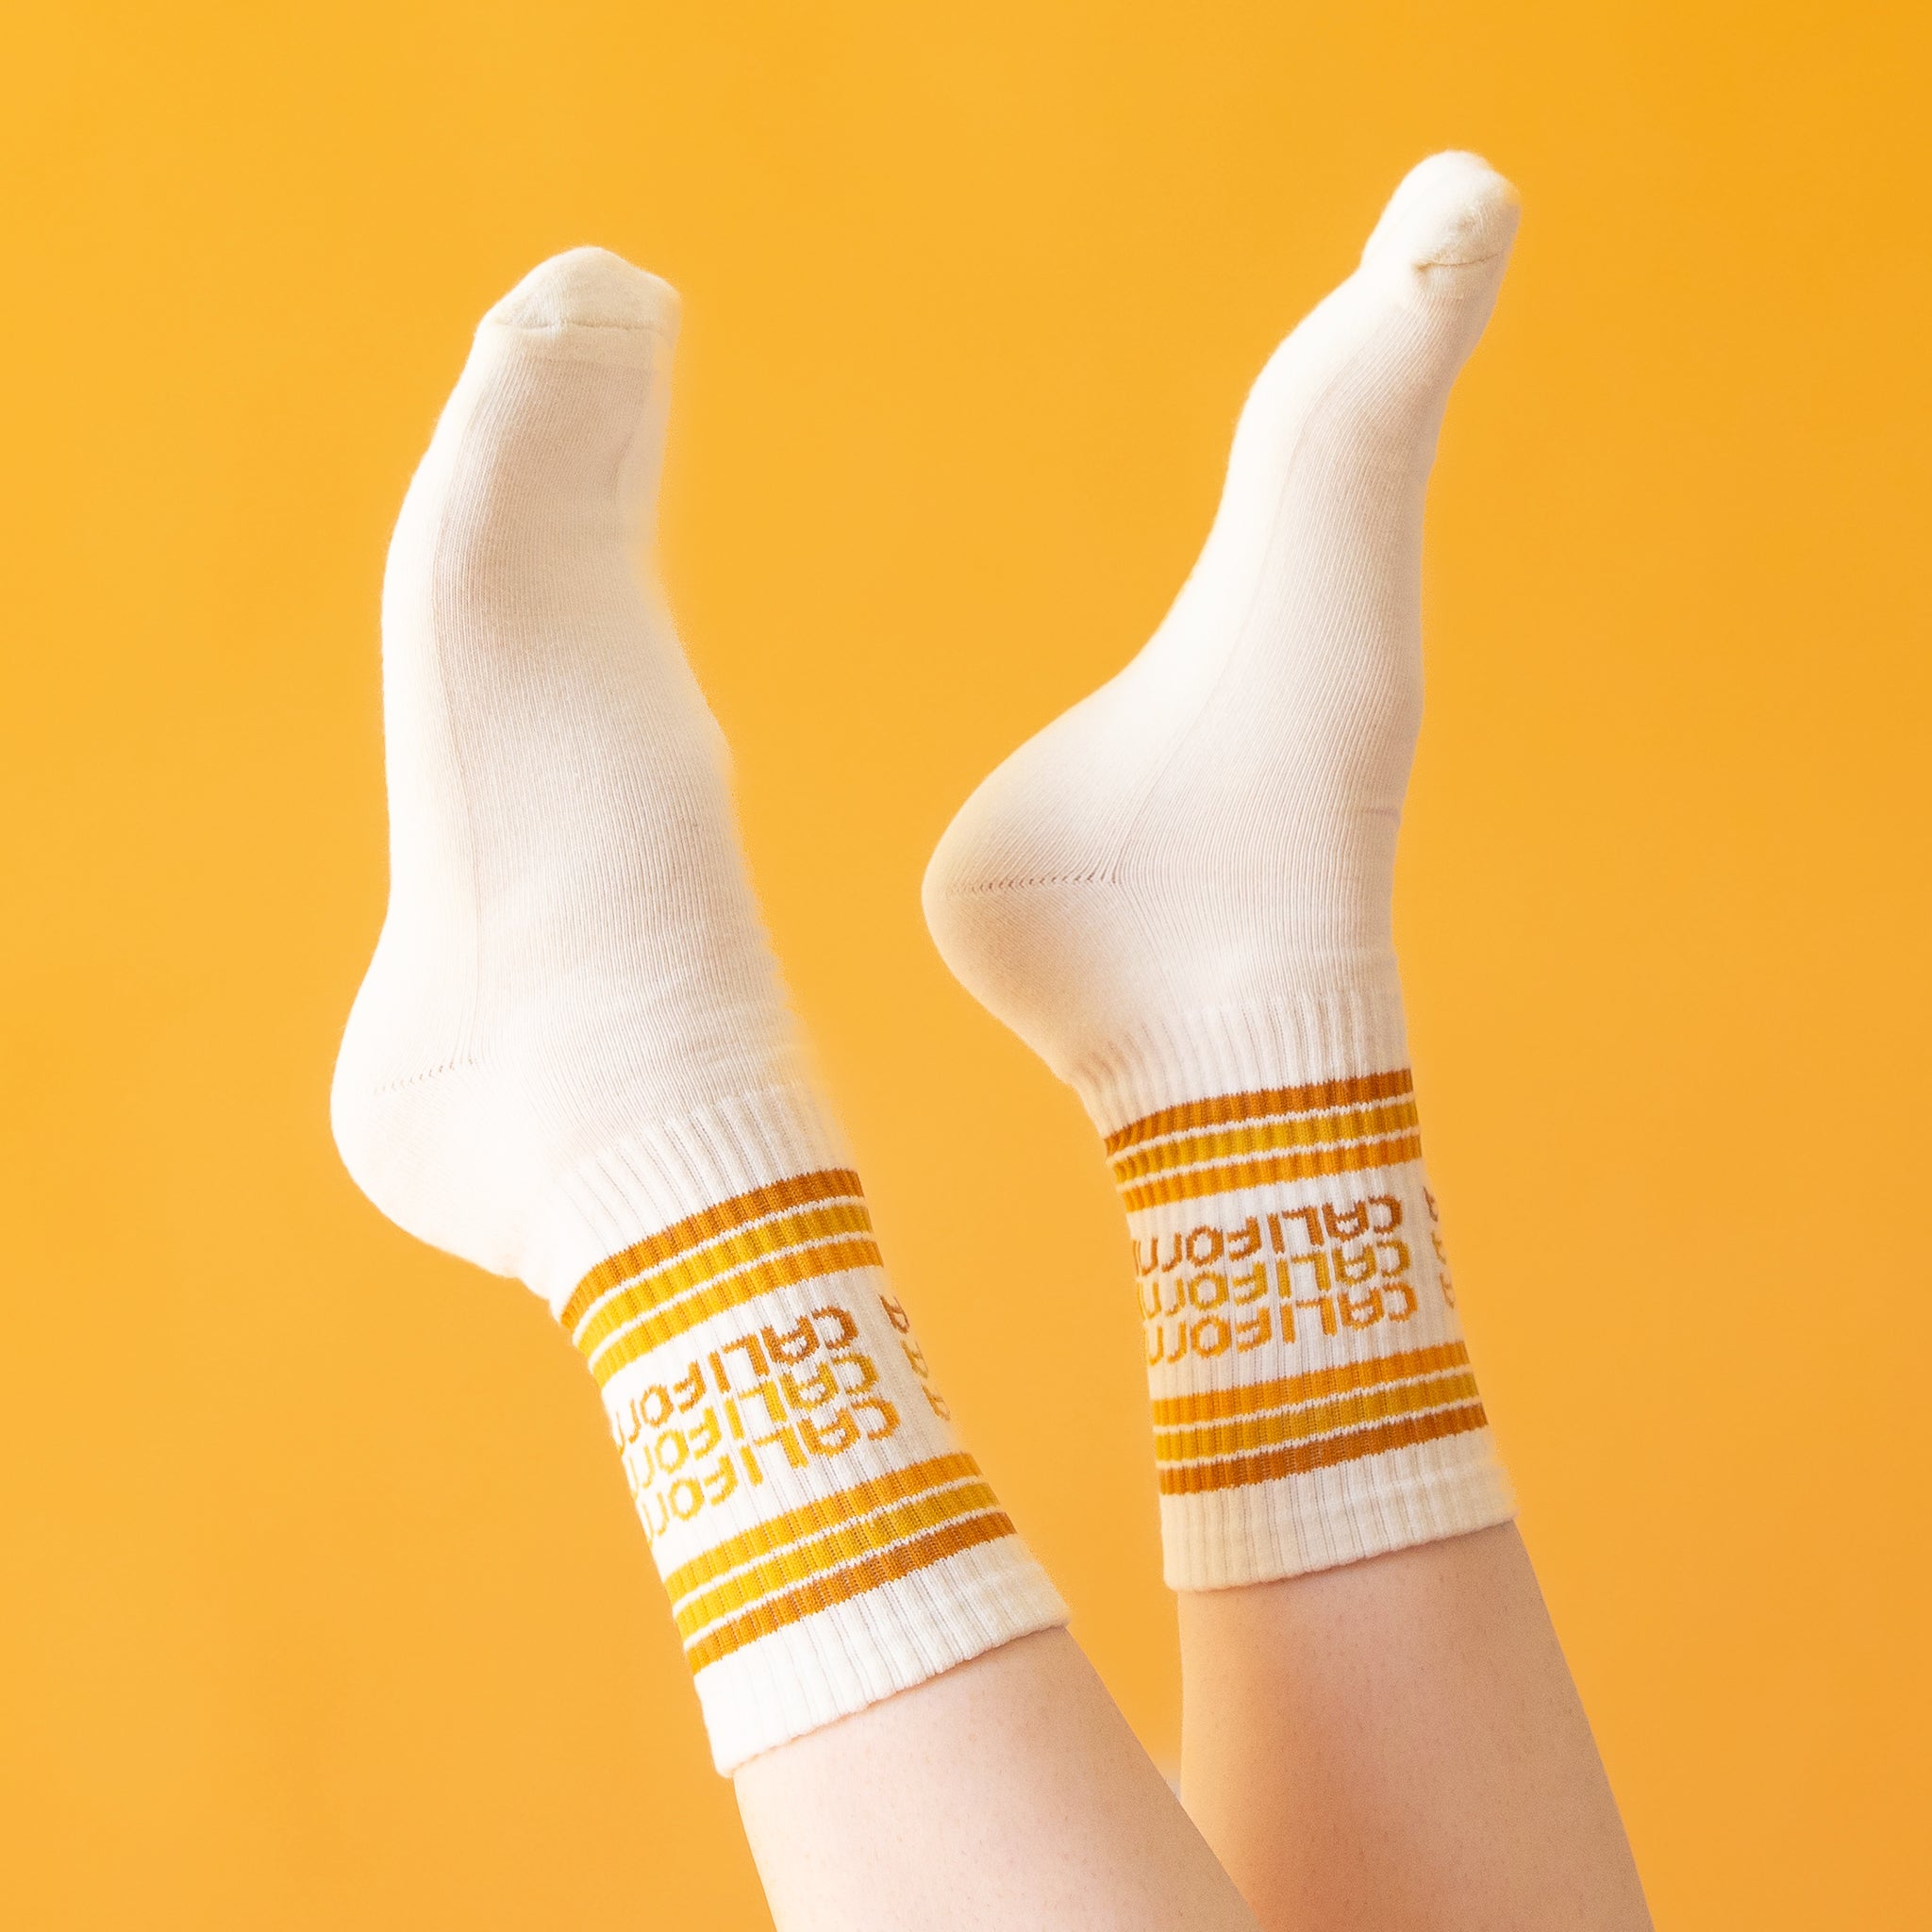 On a yellow background is a white socks with rust, yellow and orange stripes and &quot;california&quot; printed three times on the ankle.